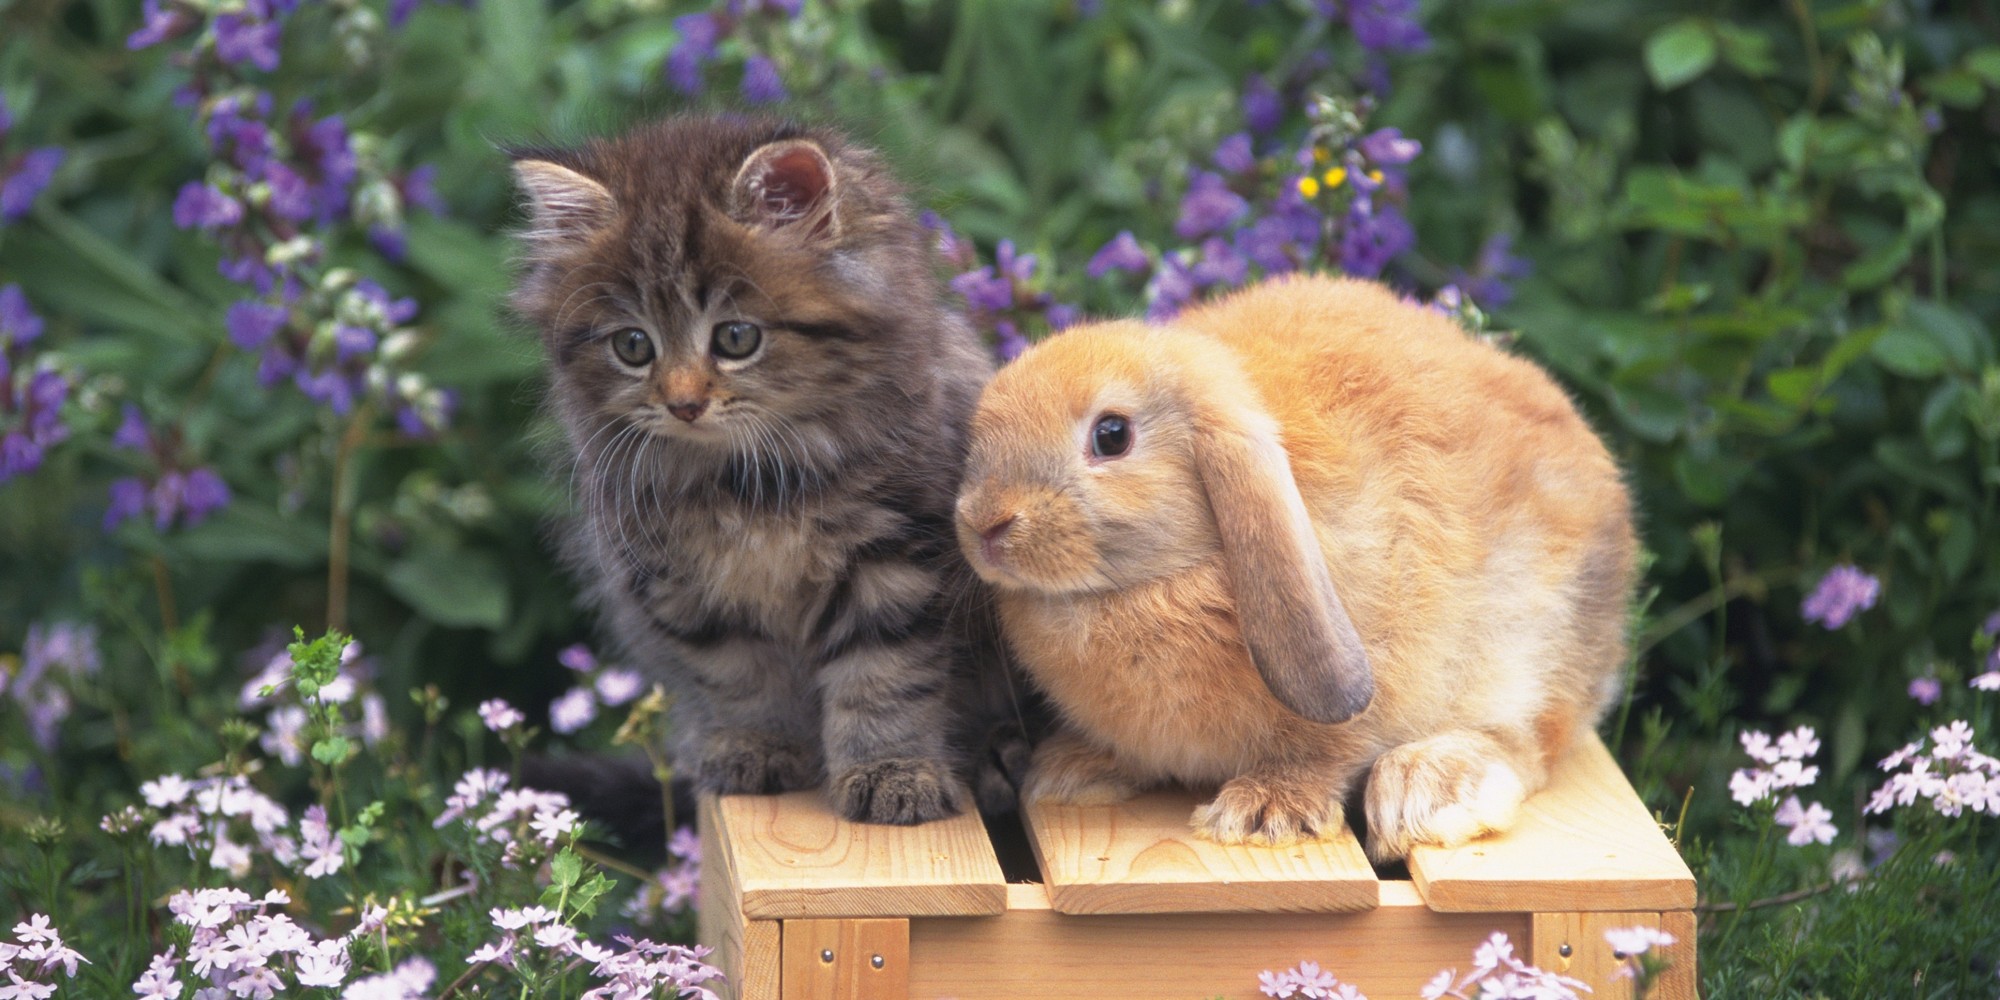 Cats and Bunnies Are Our New Favorite BFFs